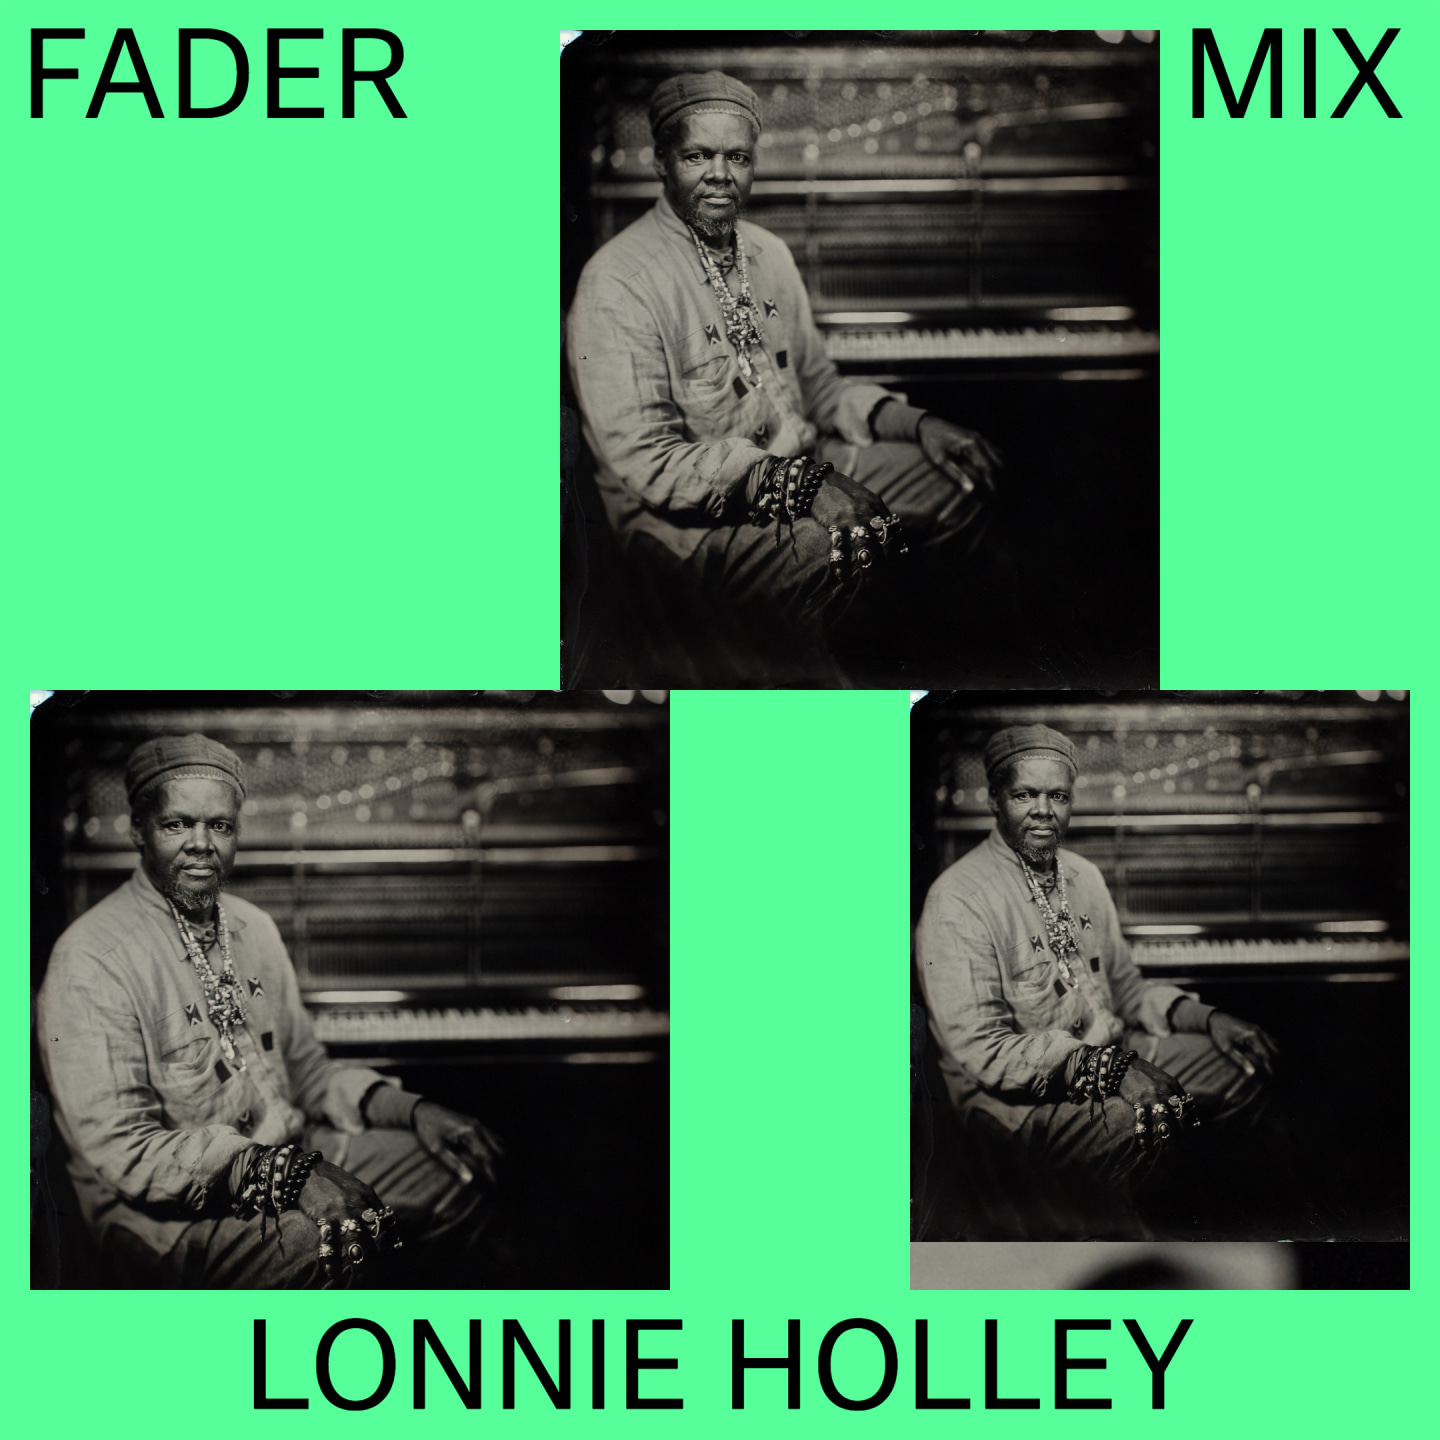 Listen to a new FADER Mix by Lonnie Holley